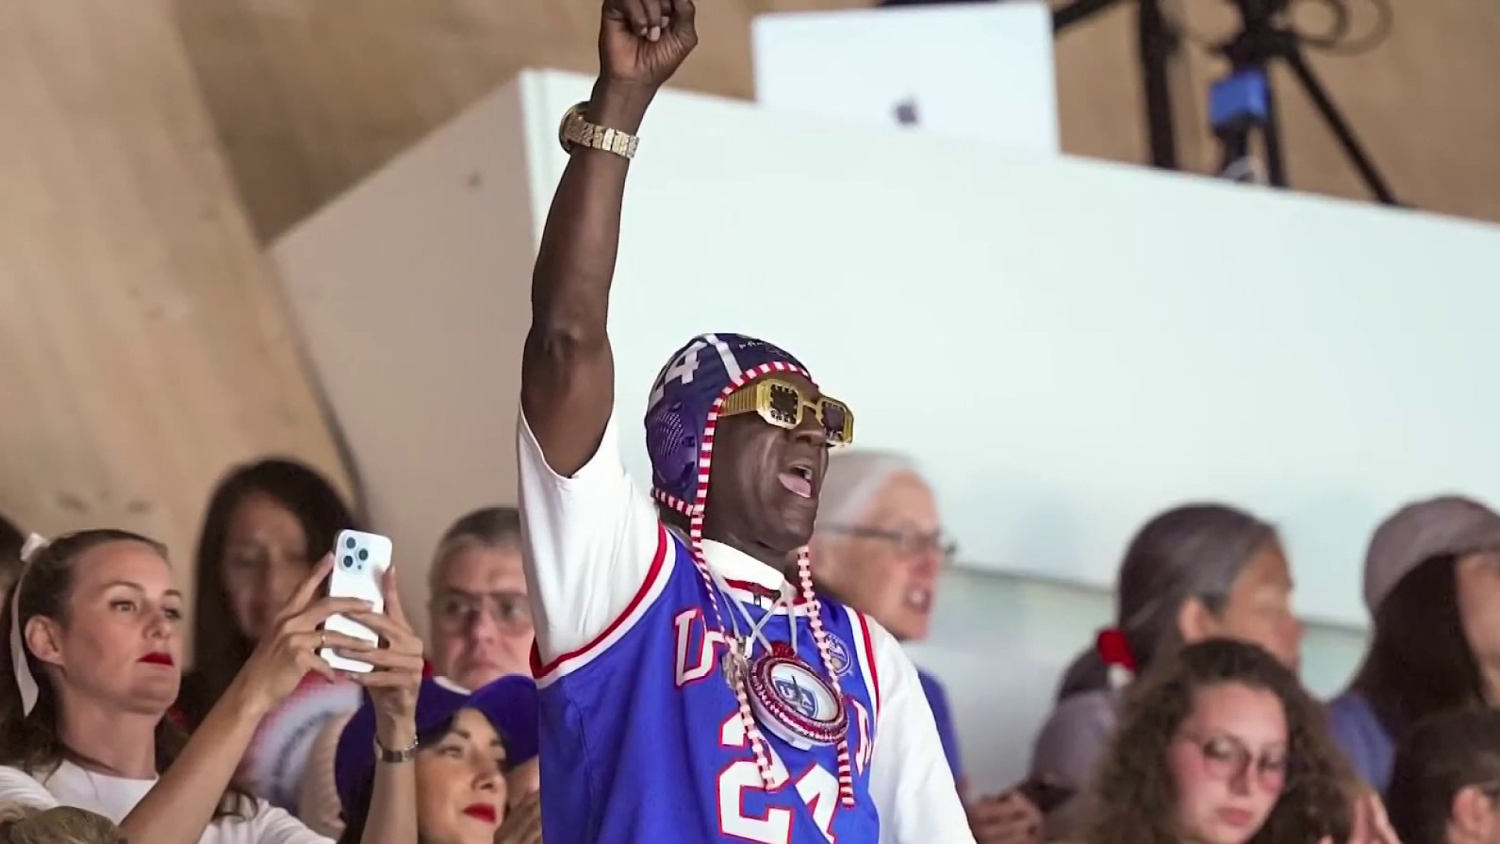 How Flavor Flav became official 'hype man' for the U.S. women’s water polo team